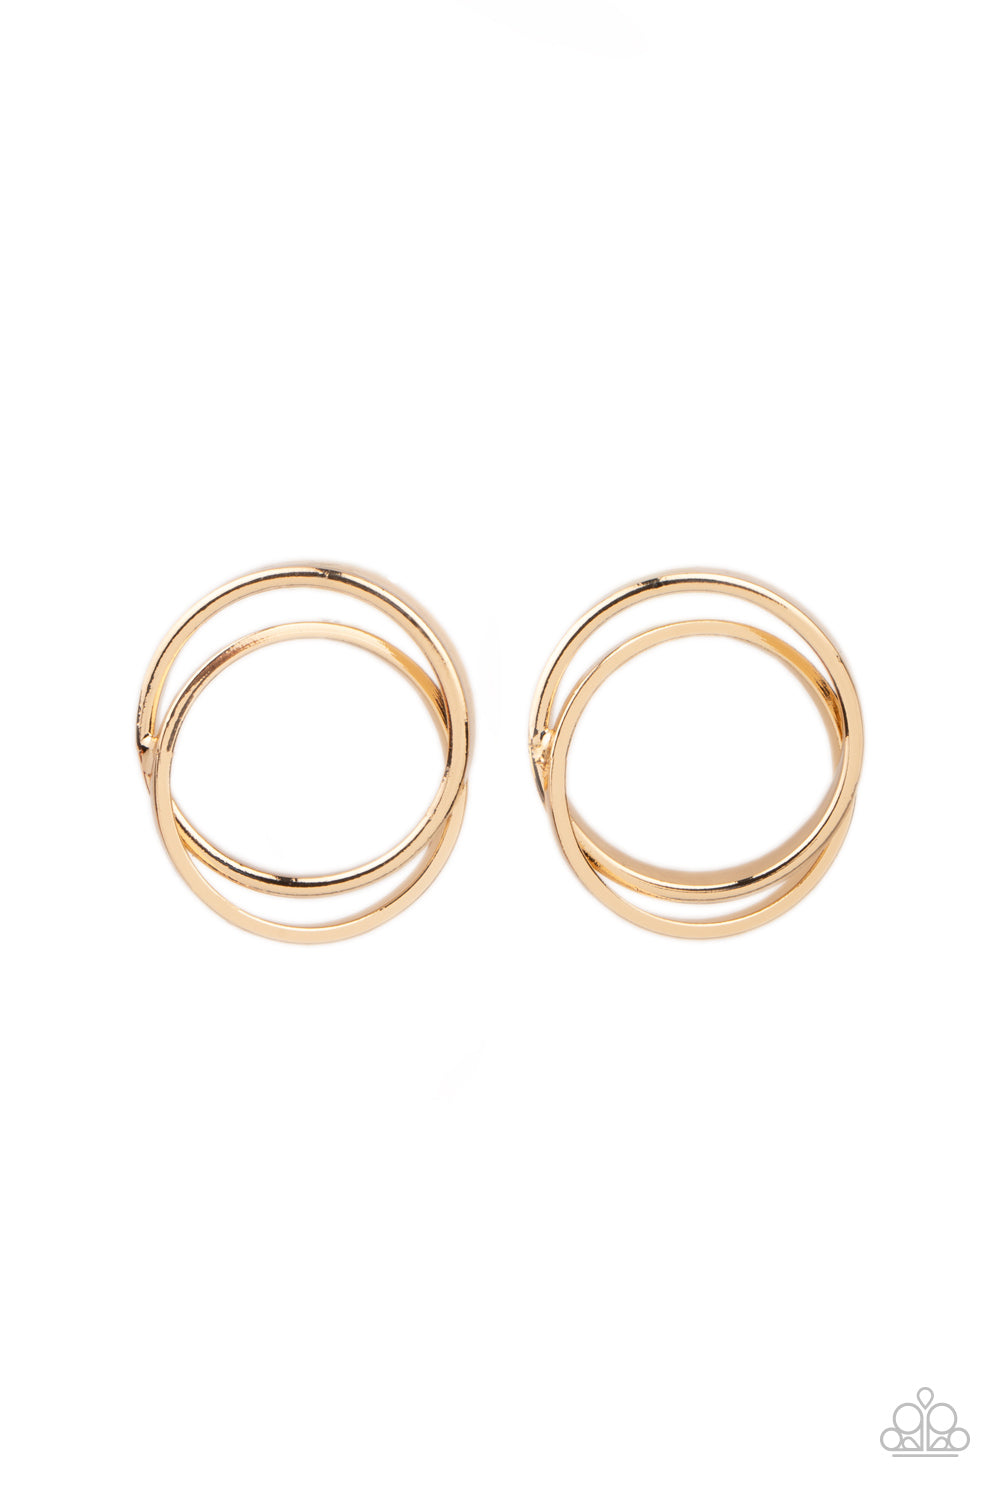 Always In The Loop - Gold Earrings - Paparazzi Accessories - Thick gold rings intricately interlock into a stacked frame for an edgy look. Earring attaches to a standard post fitting. Sold as one pair of post earrings.